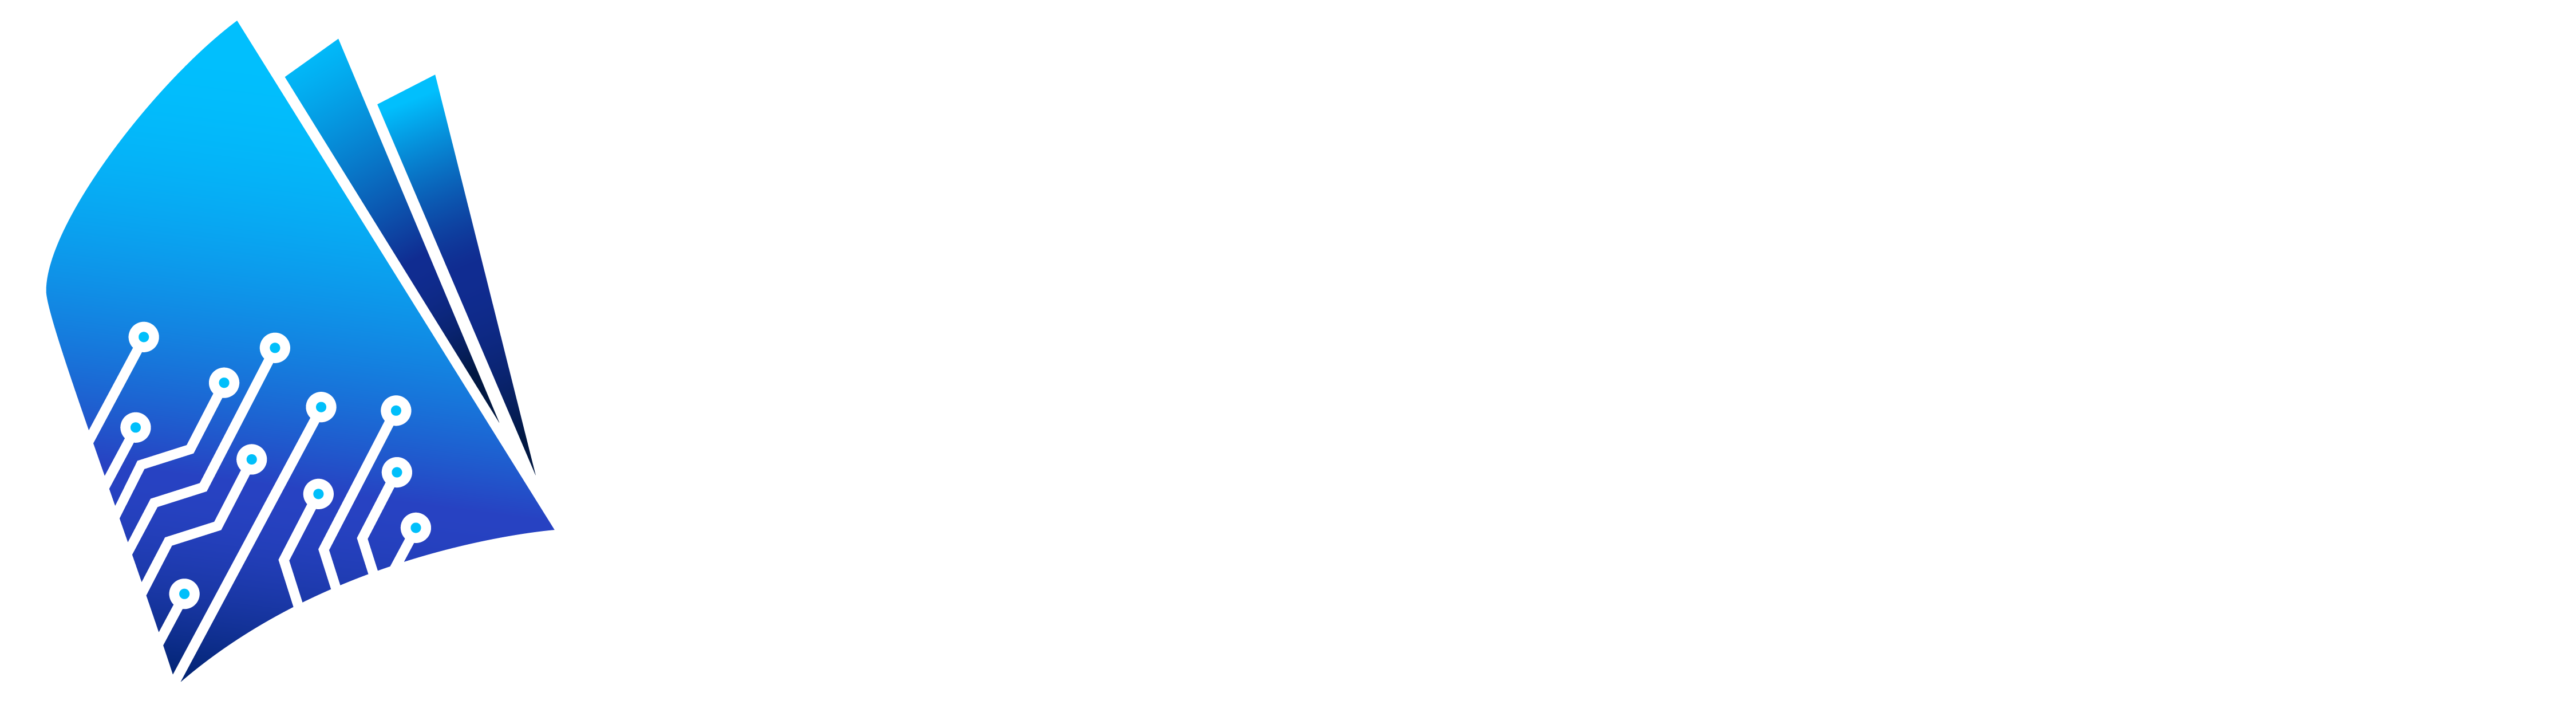 PaperEntry